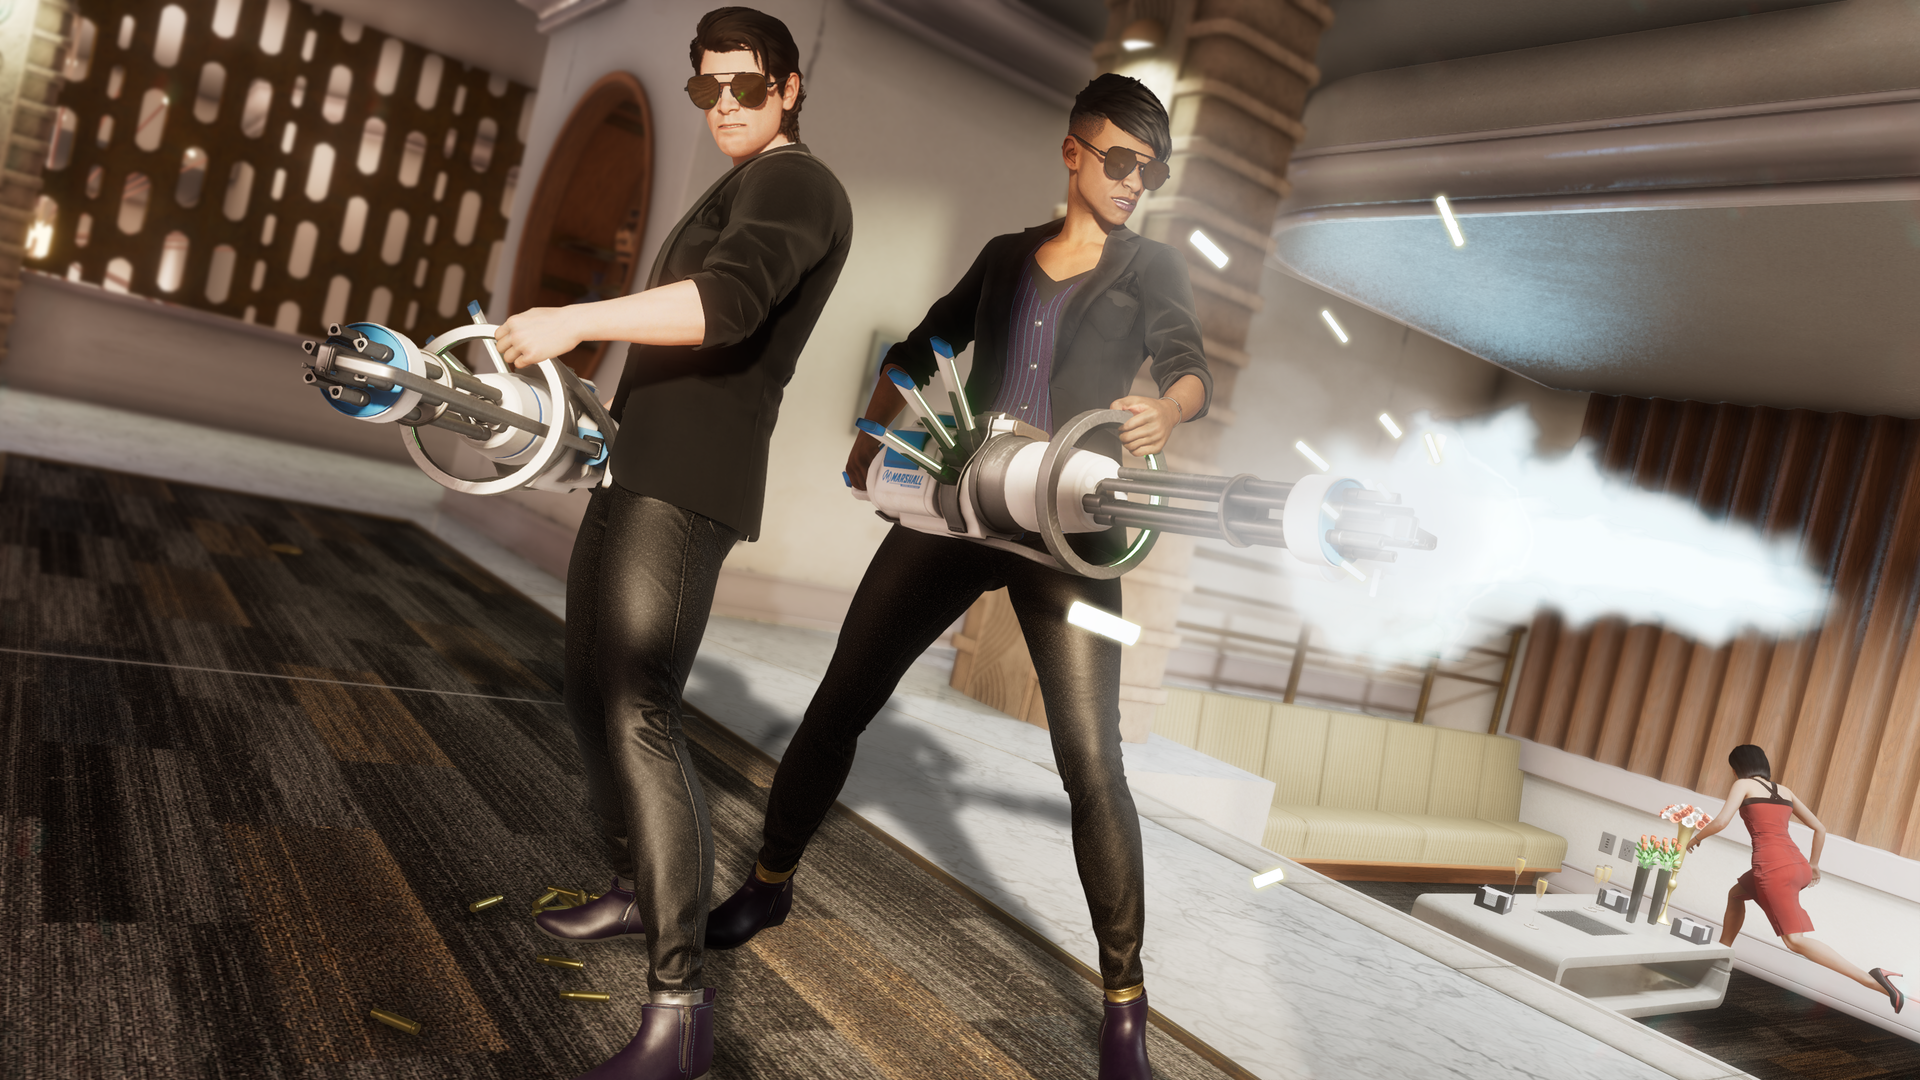 The Boss and another saint shoot up an expensive looking room with Marshall miniguns via Saint Row (2022), Deep Silver